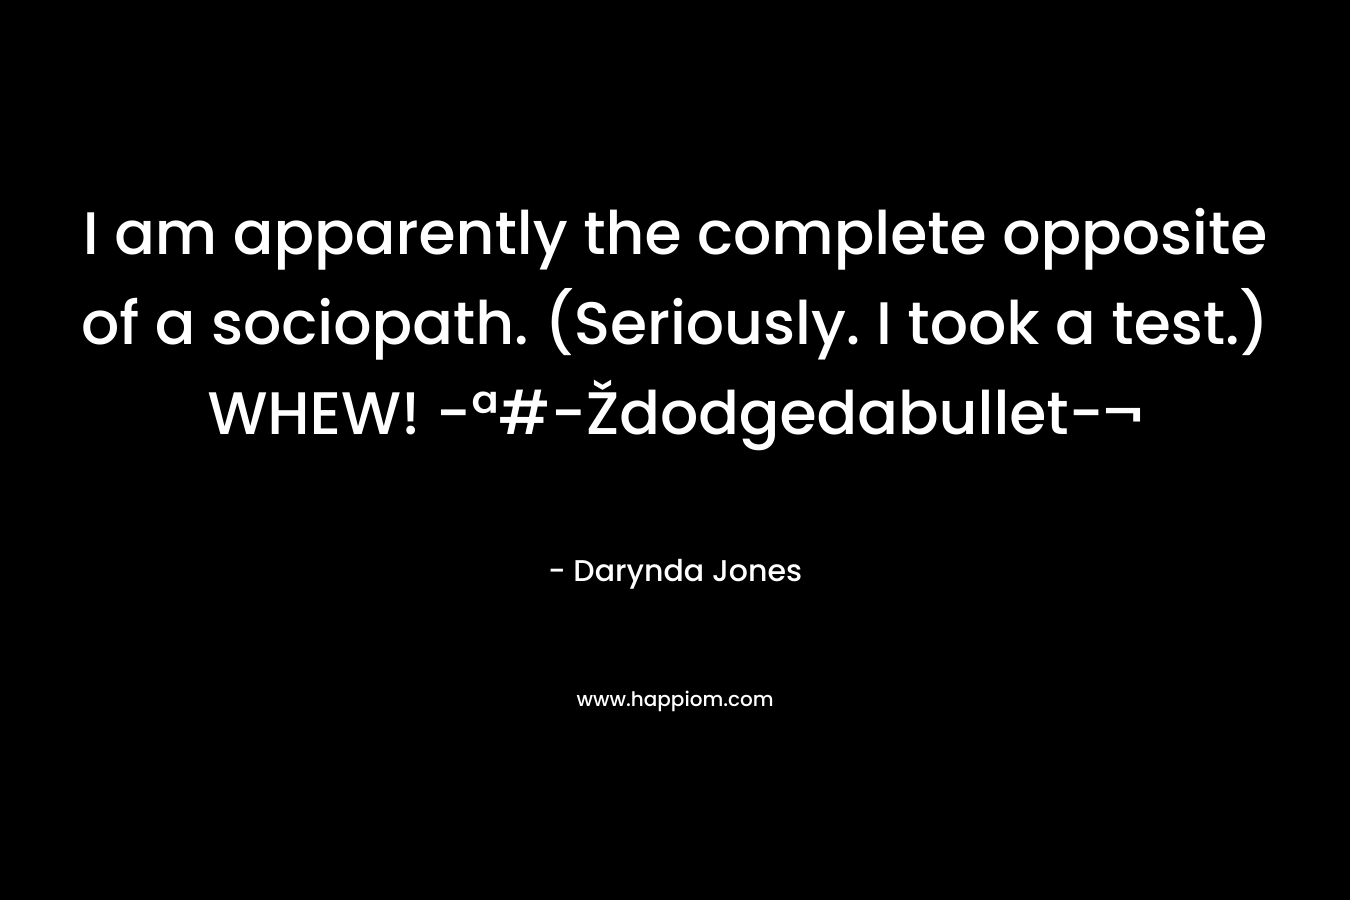 I am apparently the complete opposite of a sociopath. (Seriously. I took a test.) WHEW! -ª#-Ždodgedabullet-¬ – Darynda Jones